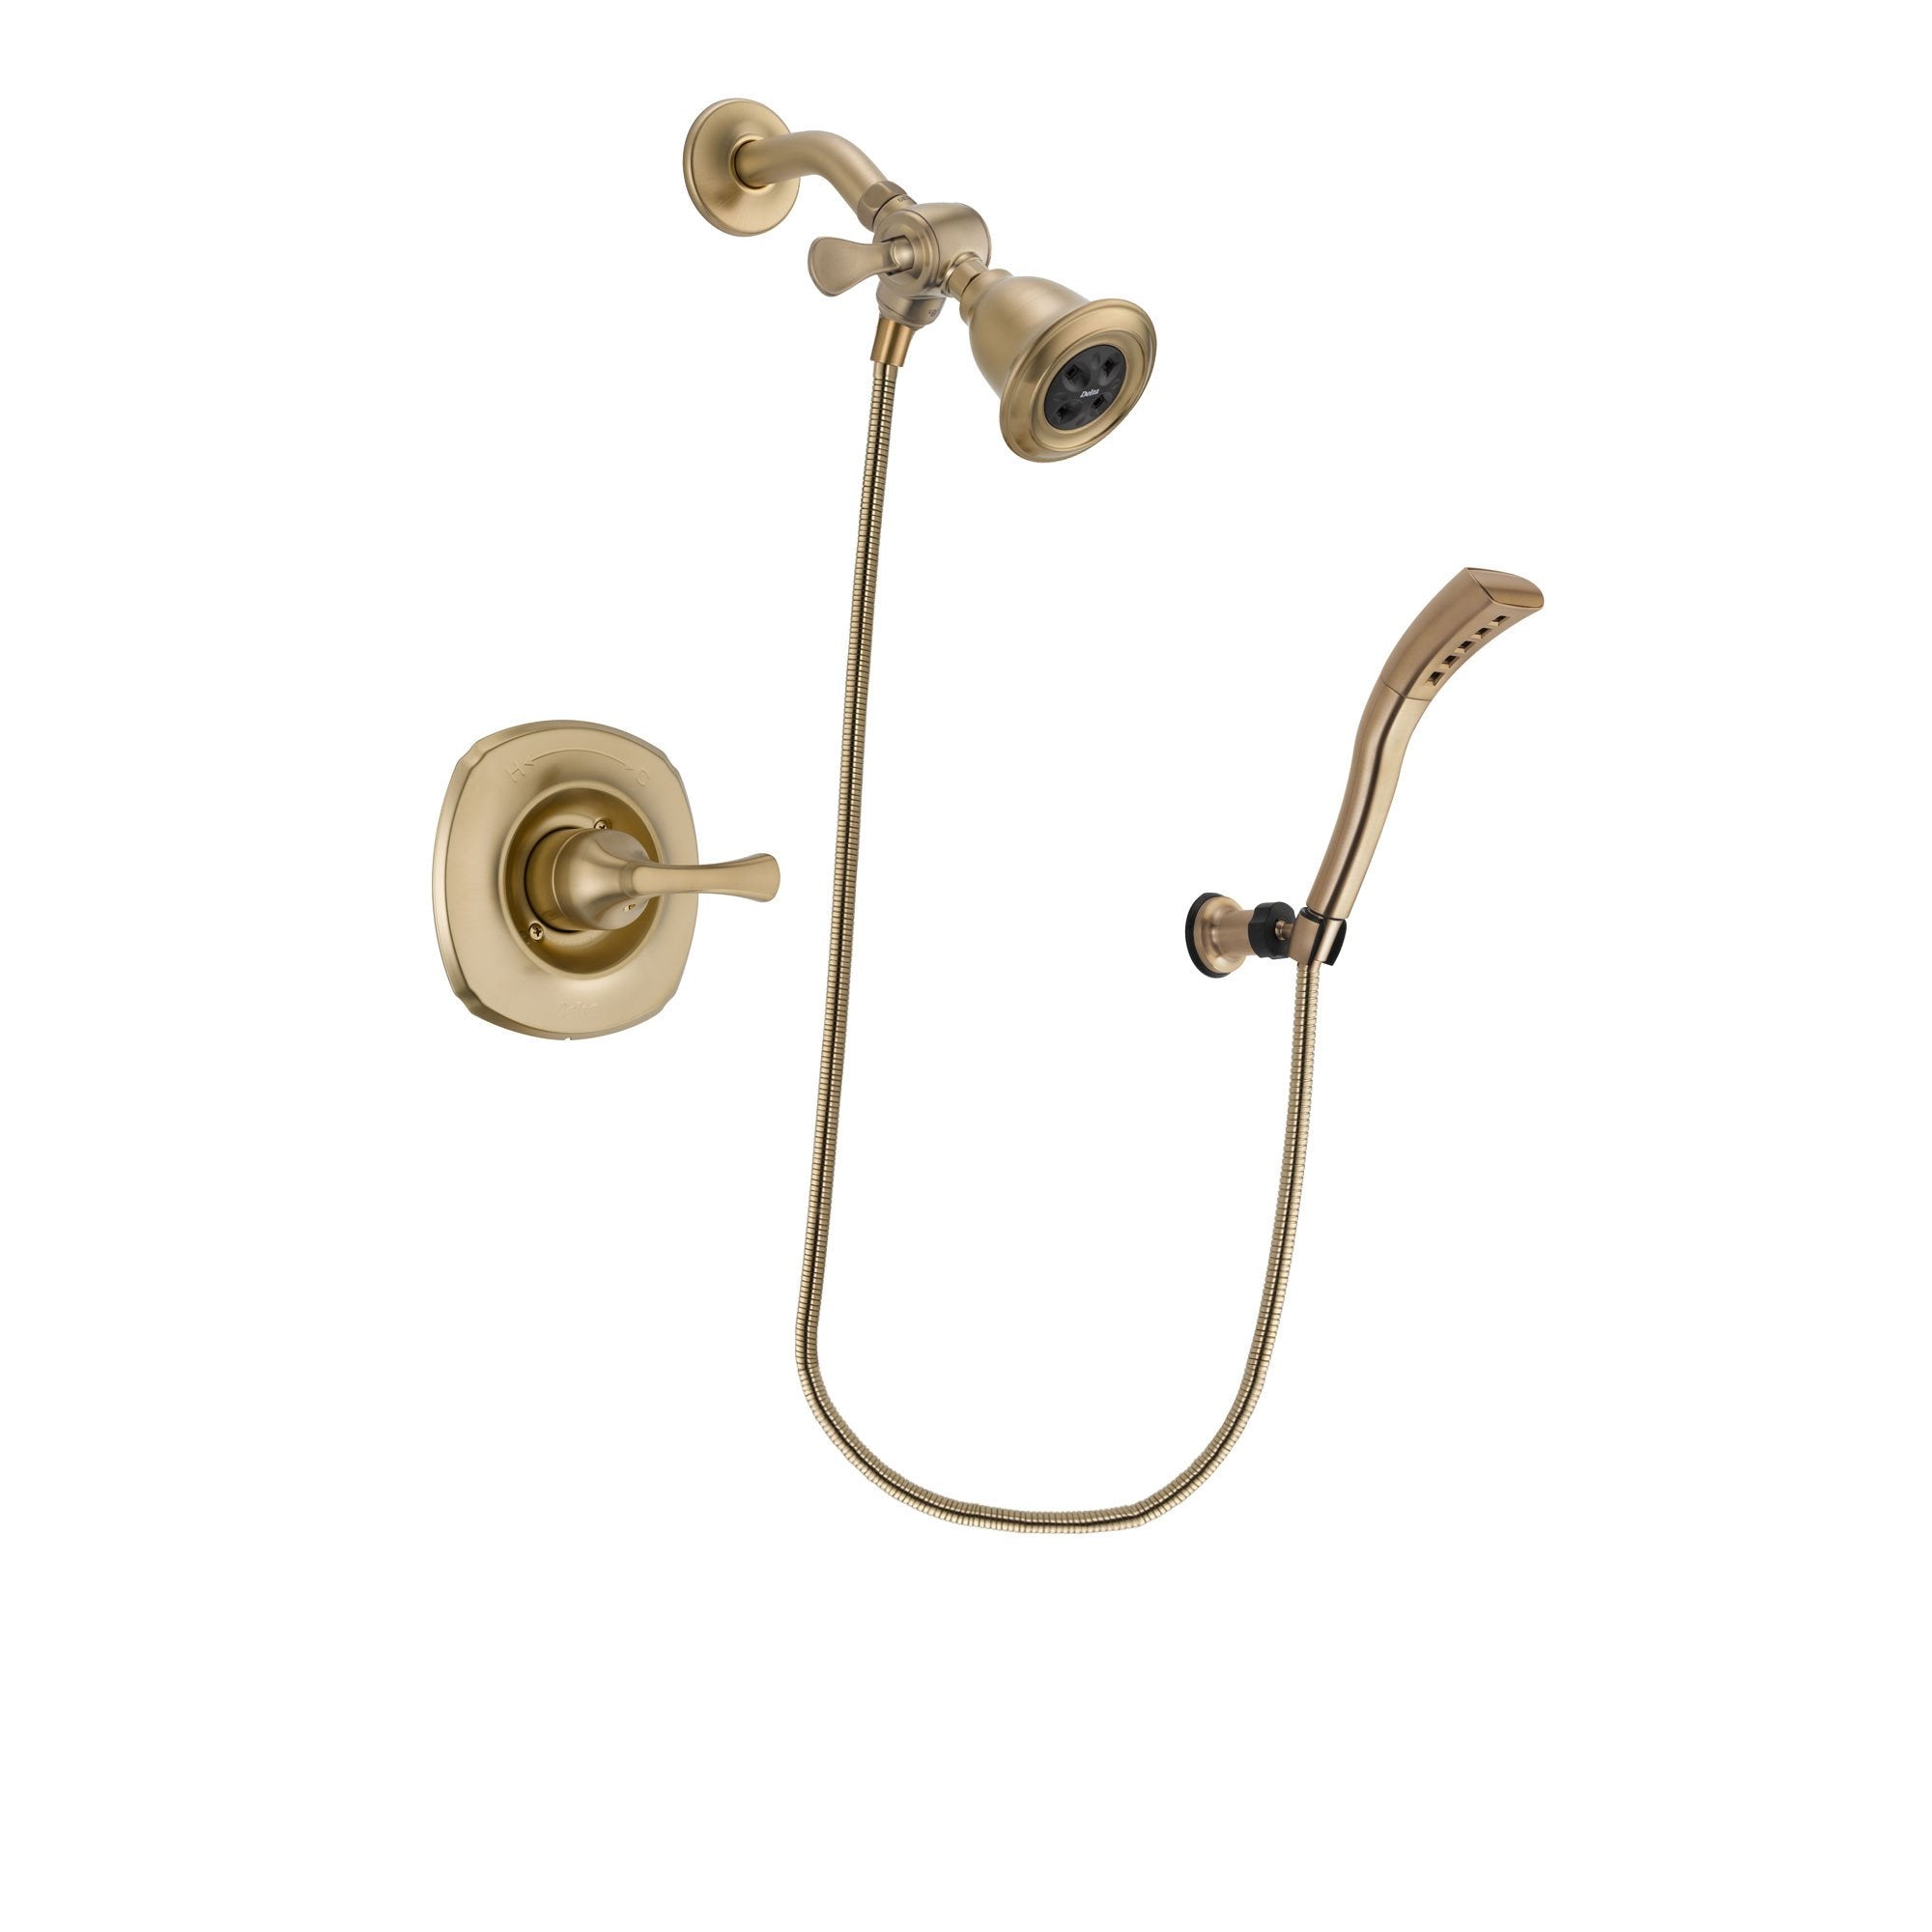 Delta Addison Champagne Bronze Finish Shower Faucet System Package with Water Efficient Showerhead and Modern Wall Mount Personal Handheld Shower Spray Includes Rough-in Valve DSP3668V